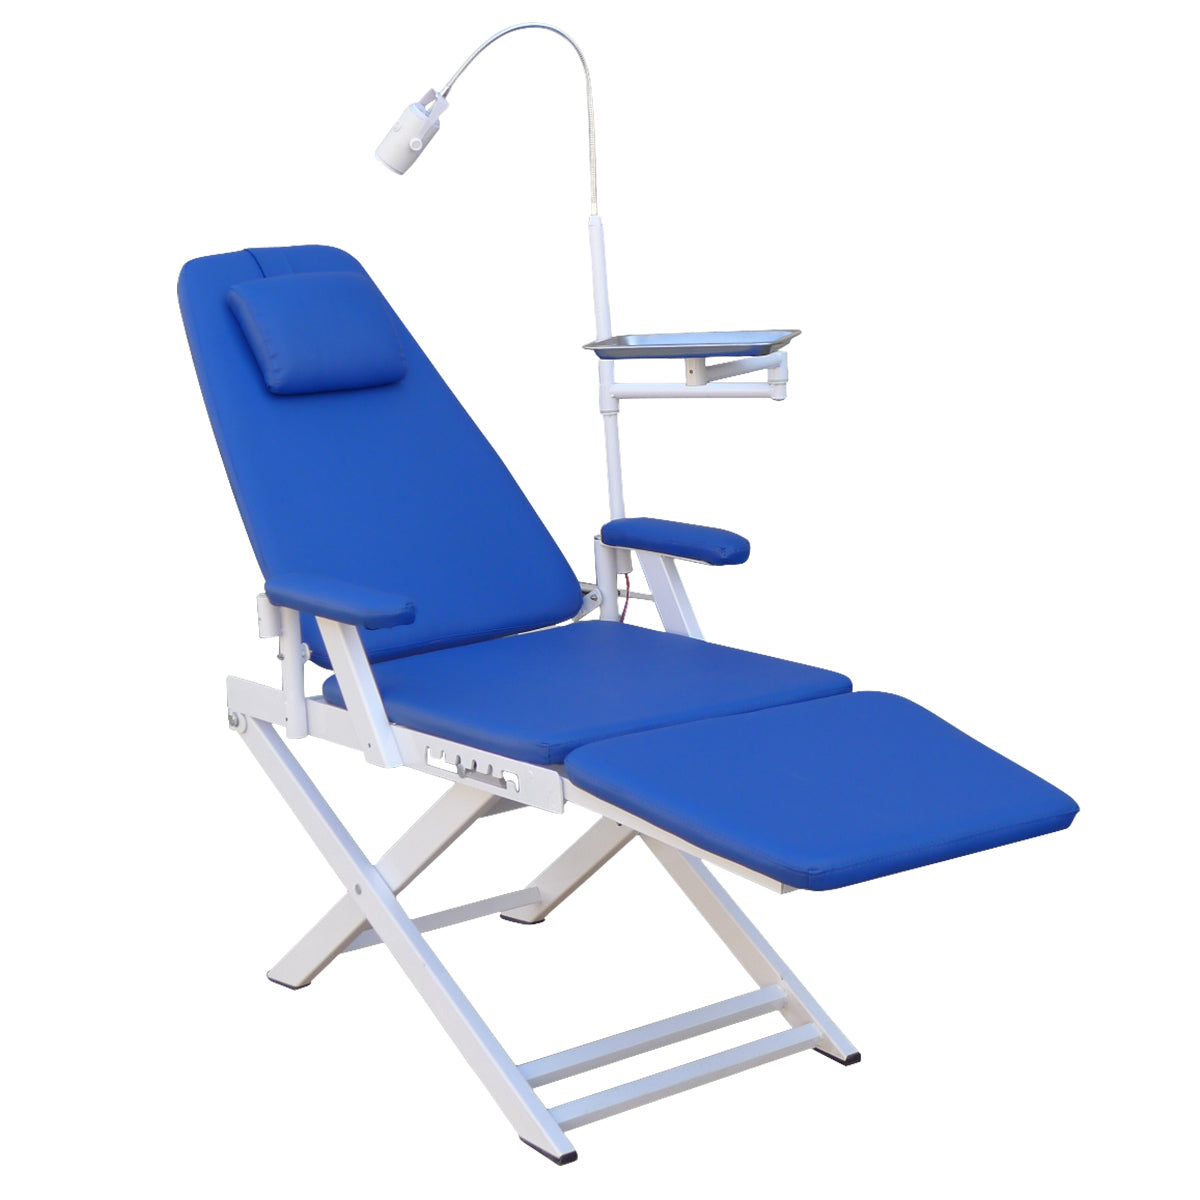 Portable Dental Folding Chair Adjustable With Rechargeable LED Light Blue - pairaydental.com